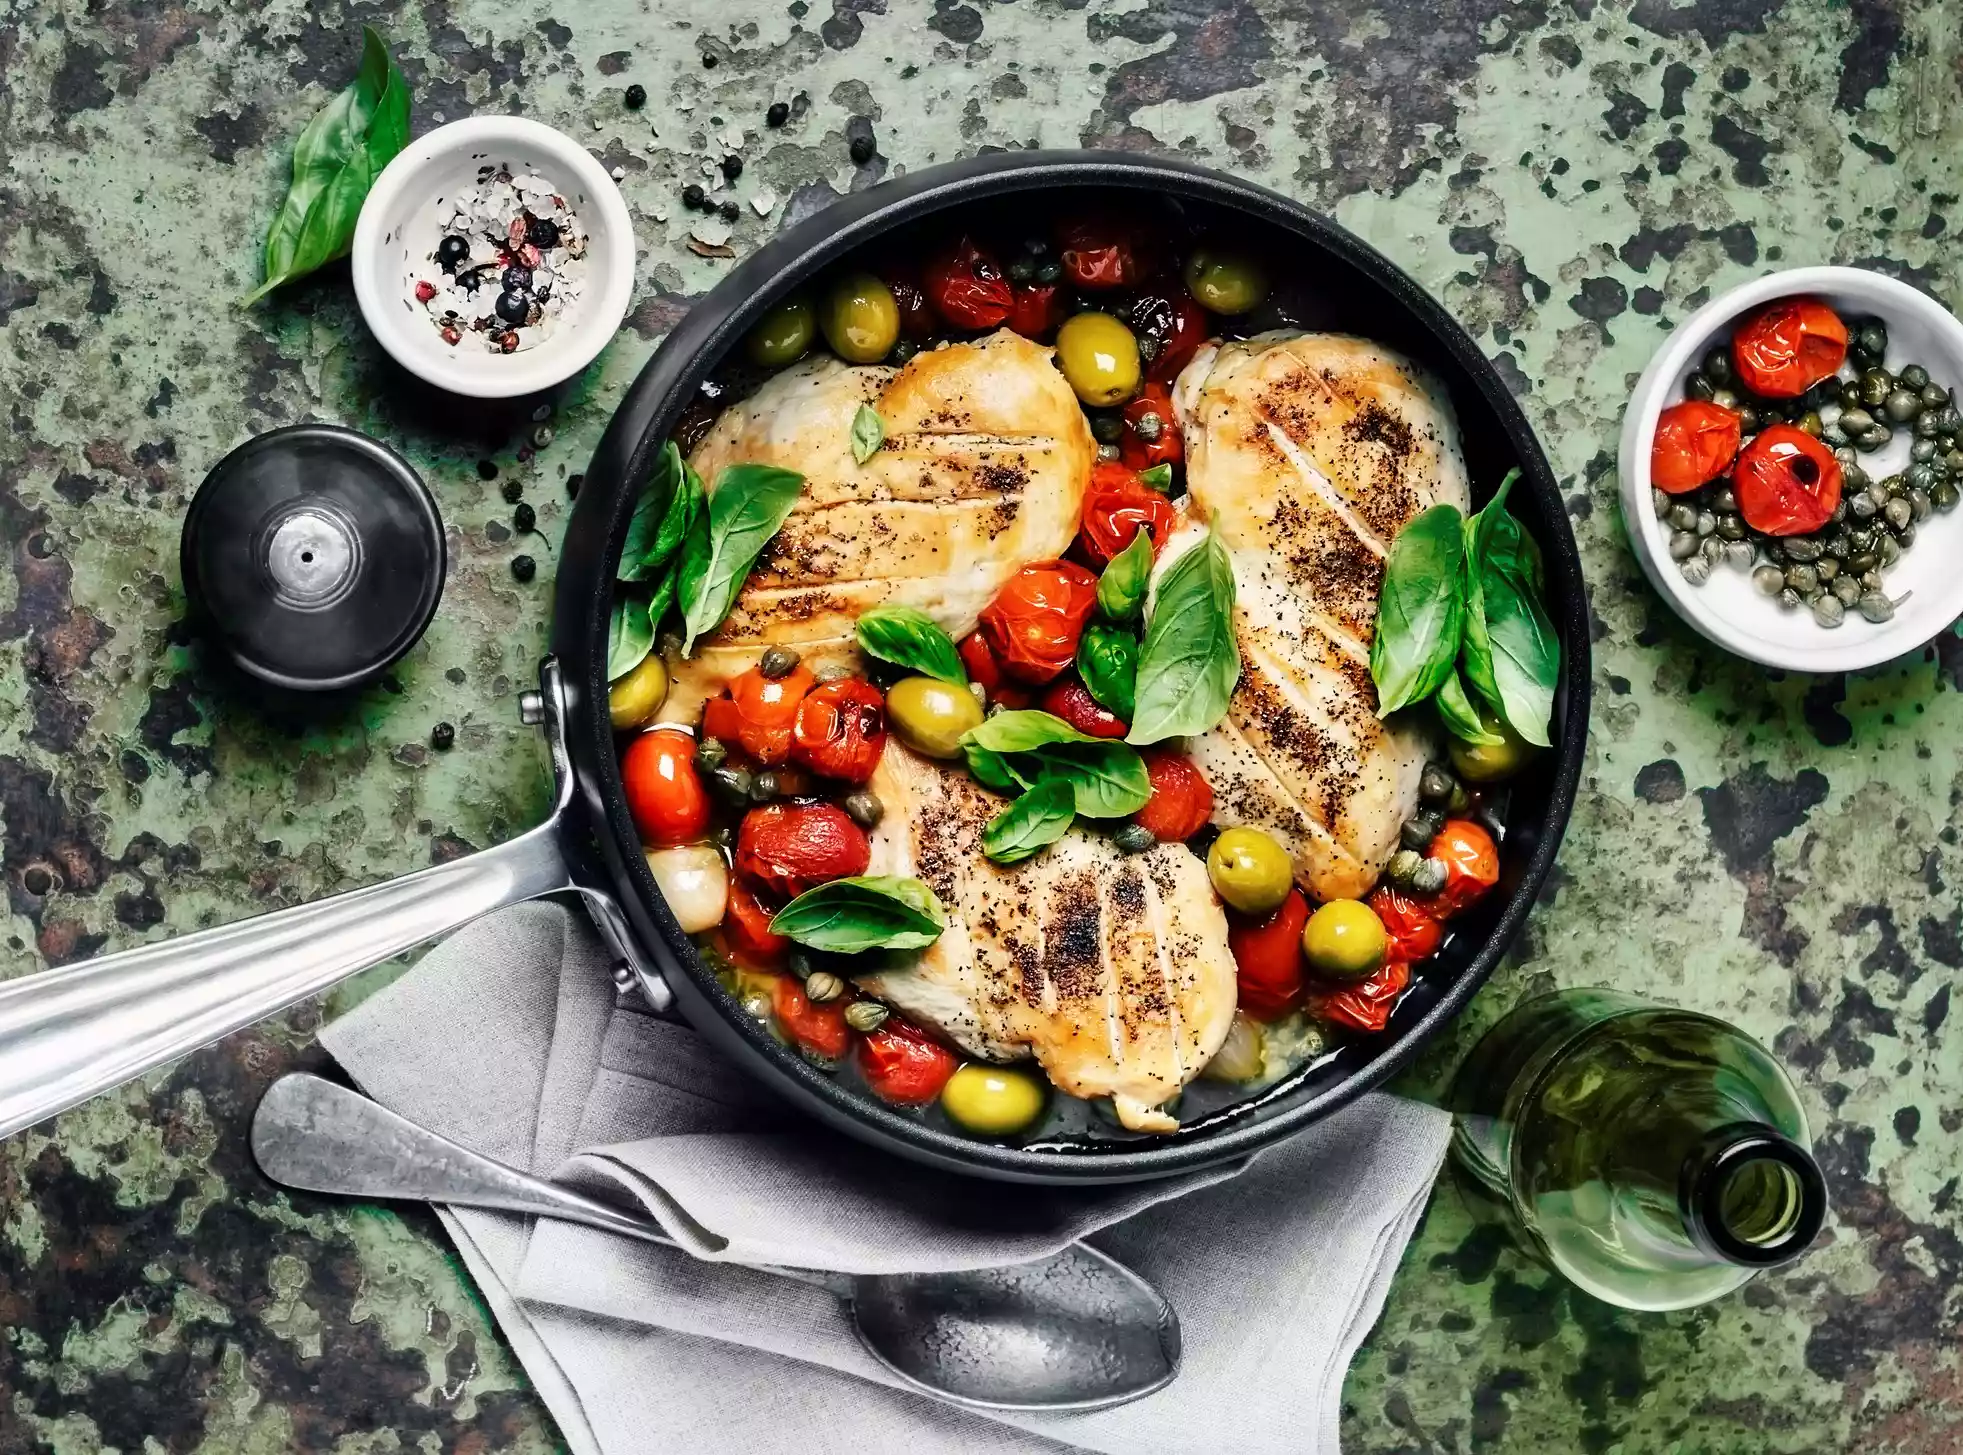 Chicken in a frying pan with tomatoes, spinach leaves, and olives